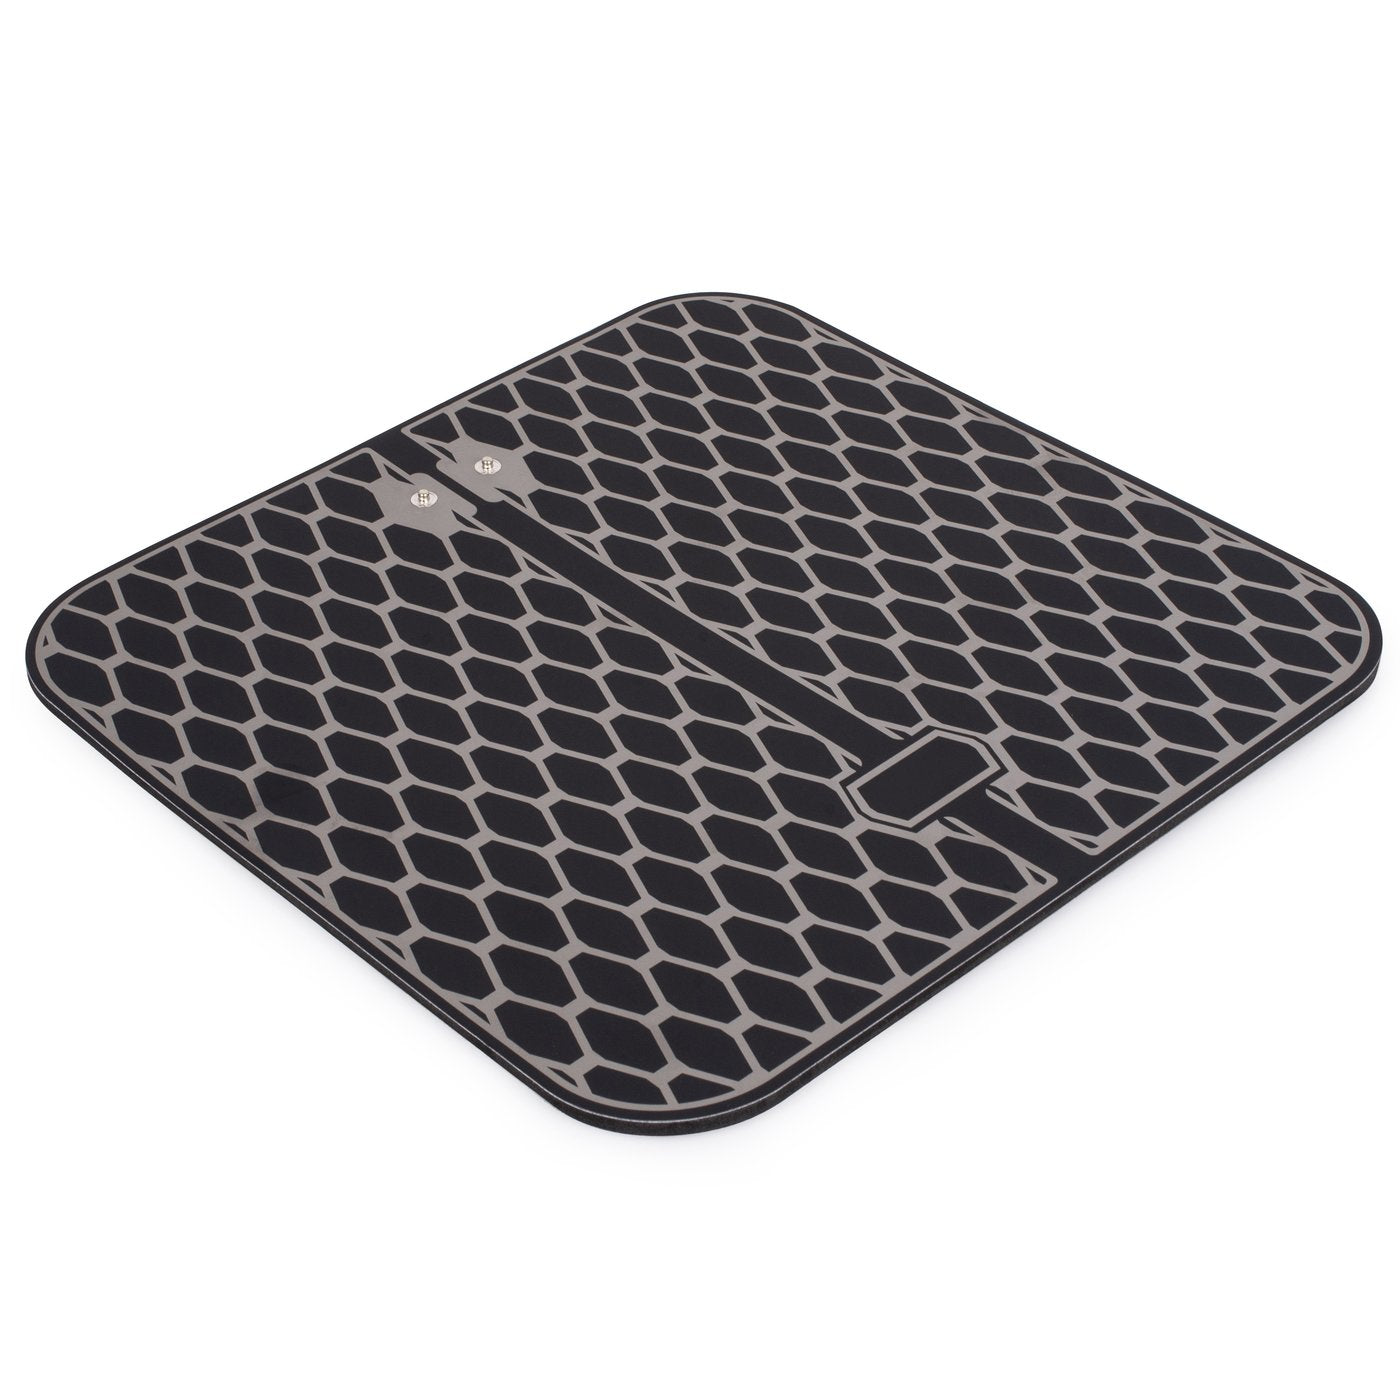 Easy@Home TENS Foot Massager Mat - Accessory of TENS Model# EHE015 &  EHE015BLE & EHE029G (Controller…See more Easy@Home TENS Foot Massager Mat 